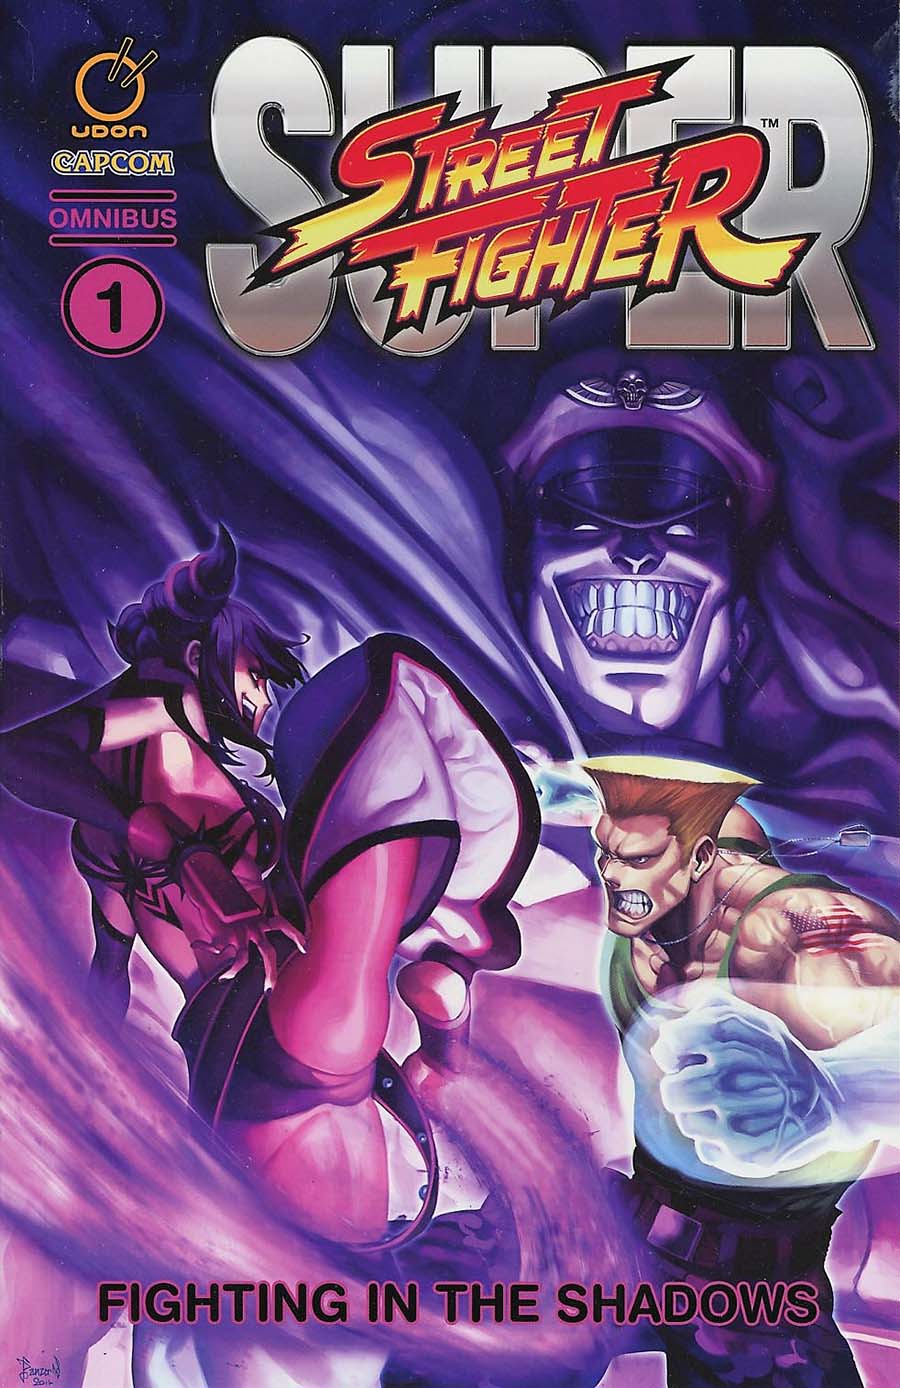 Super Street Fighter Omnibus Vol 1 Fighting In The Shadows TP